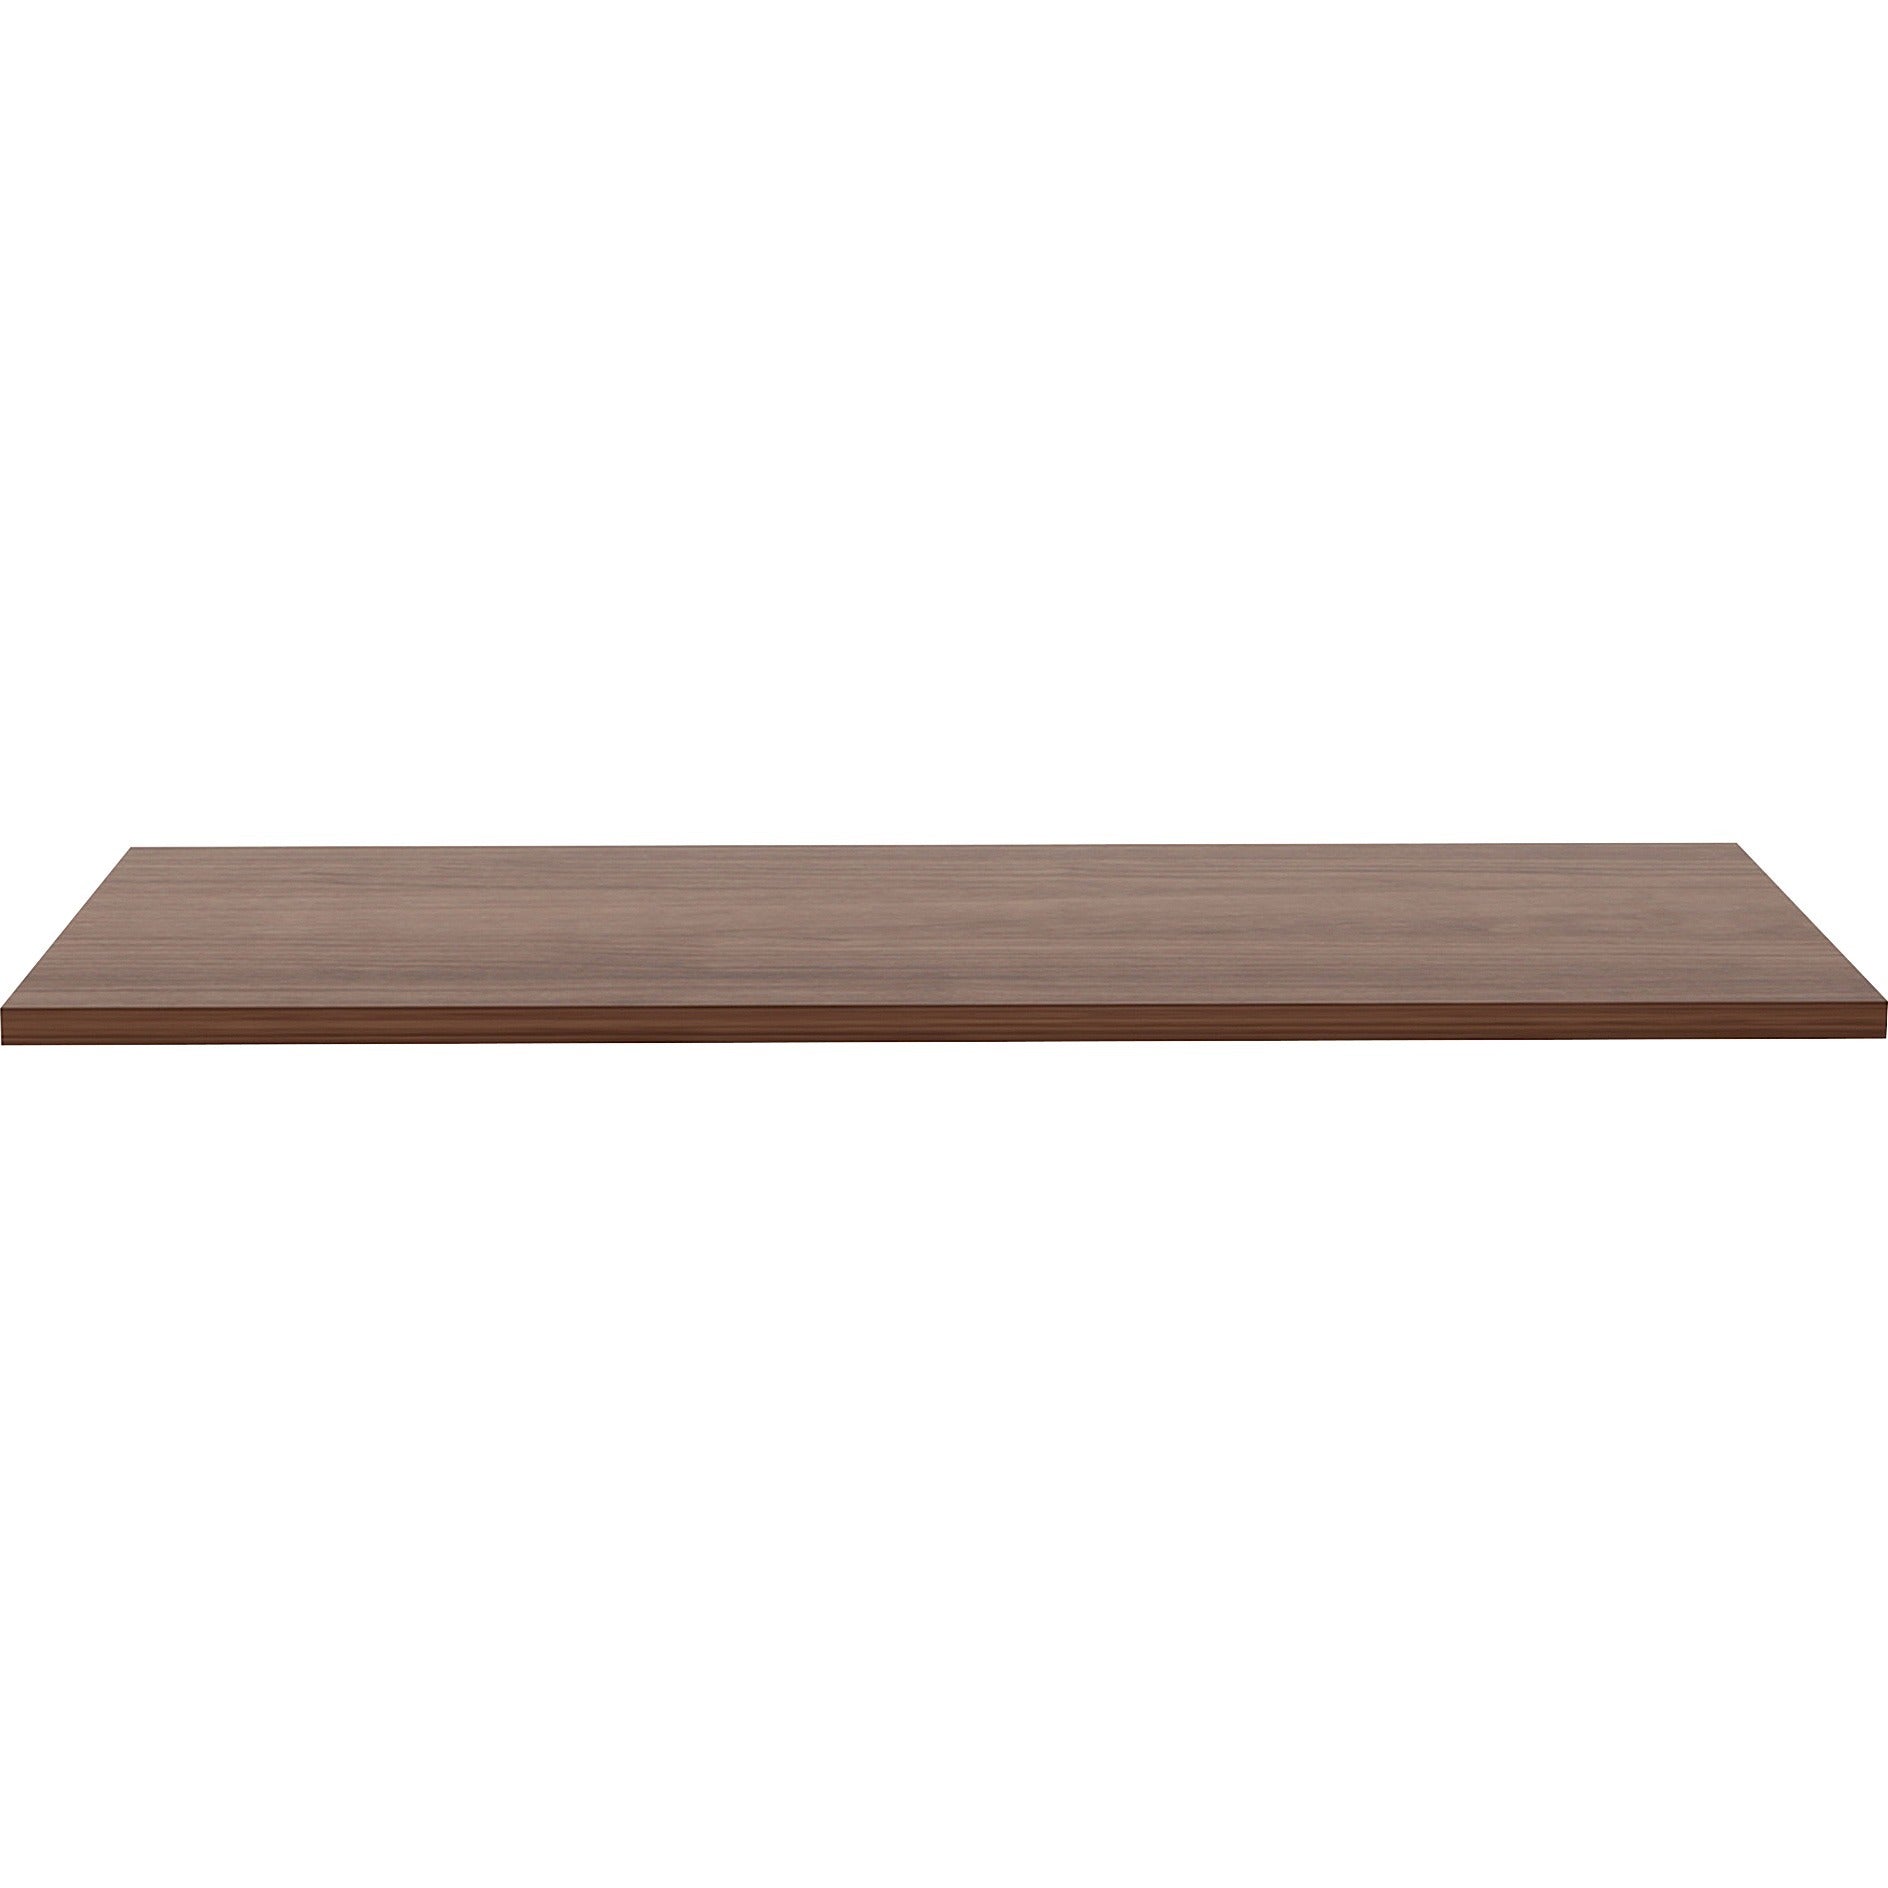 lorell-relevance-series-tabletop-for-table-topwalnut-rectangle-laminated-top-48-table-top-length-x-24-table-top-width-x-1-table-top-thickness-assembly-required-1-each_llr59638 - 2